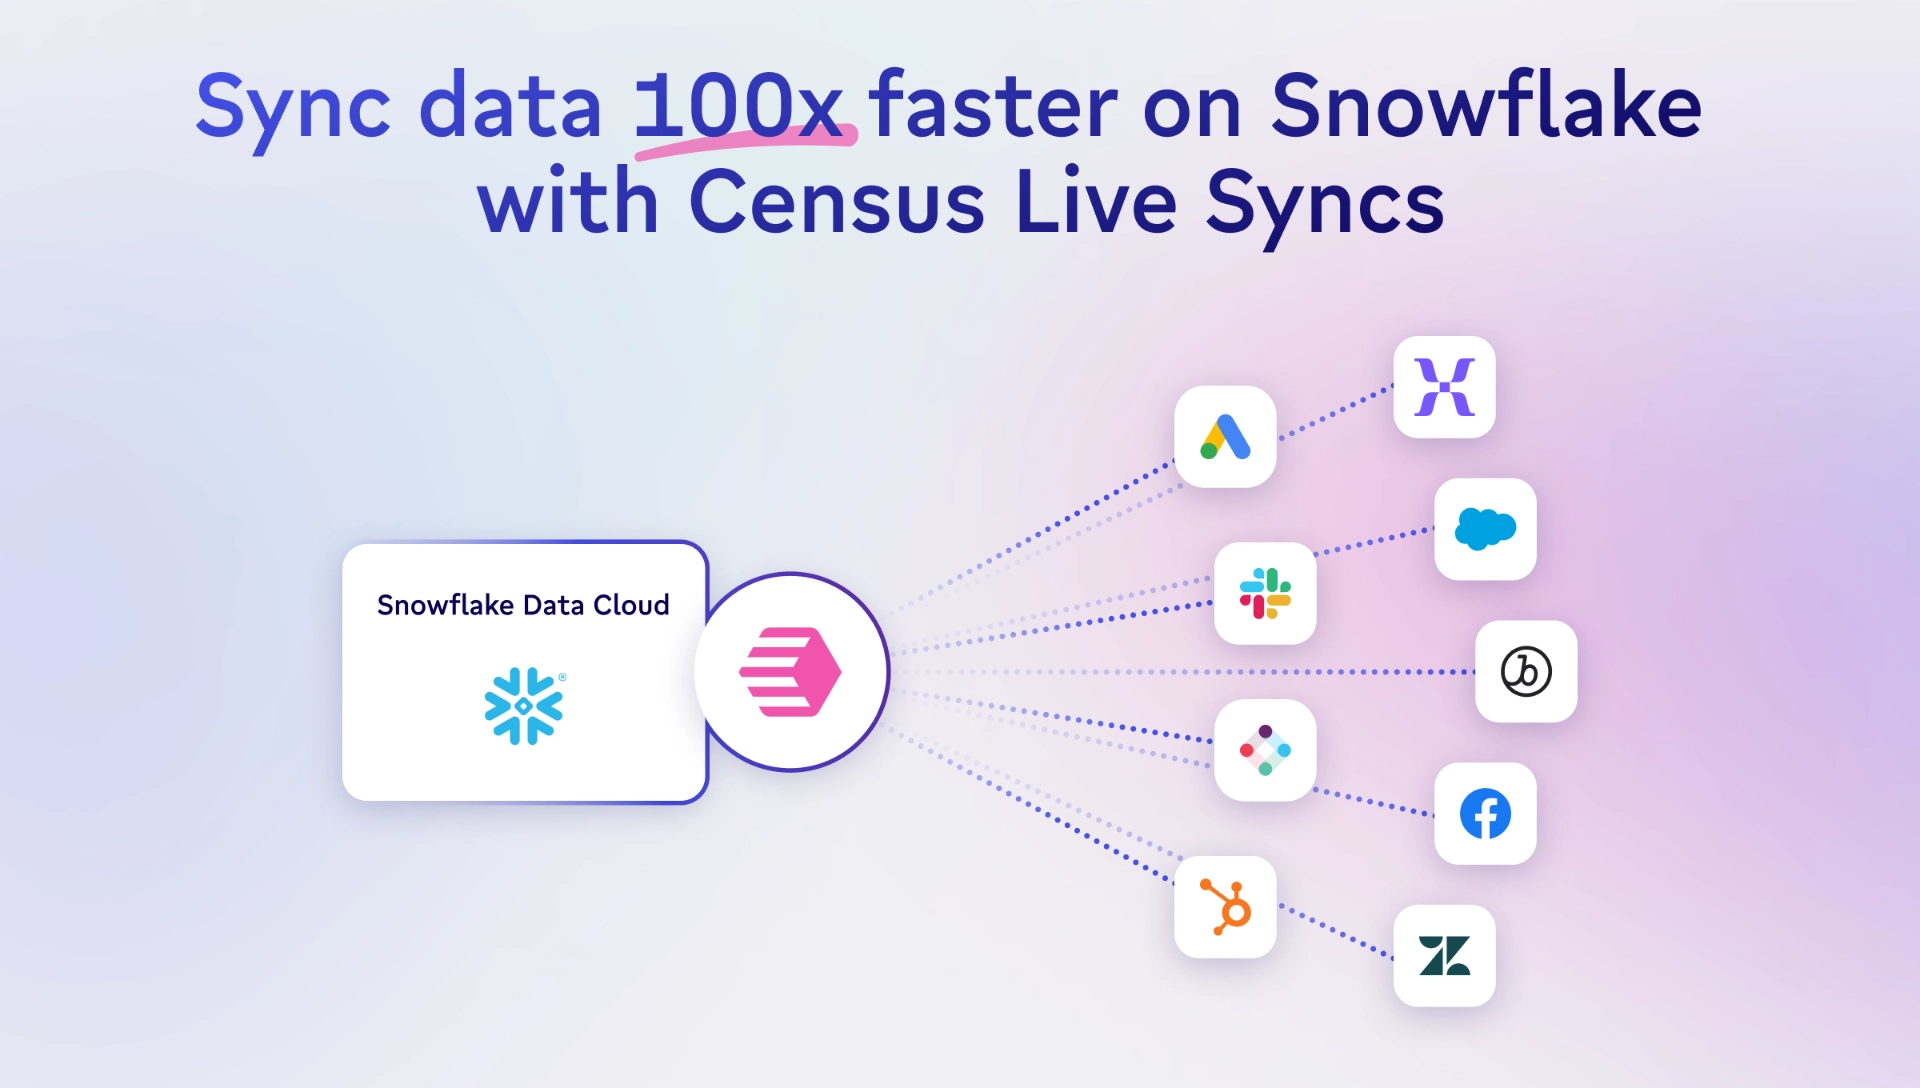 Sync data 100x faster on Snowflake with Census Live Syncs